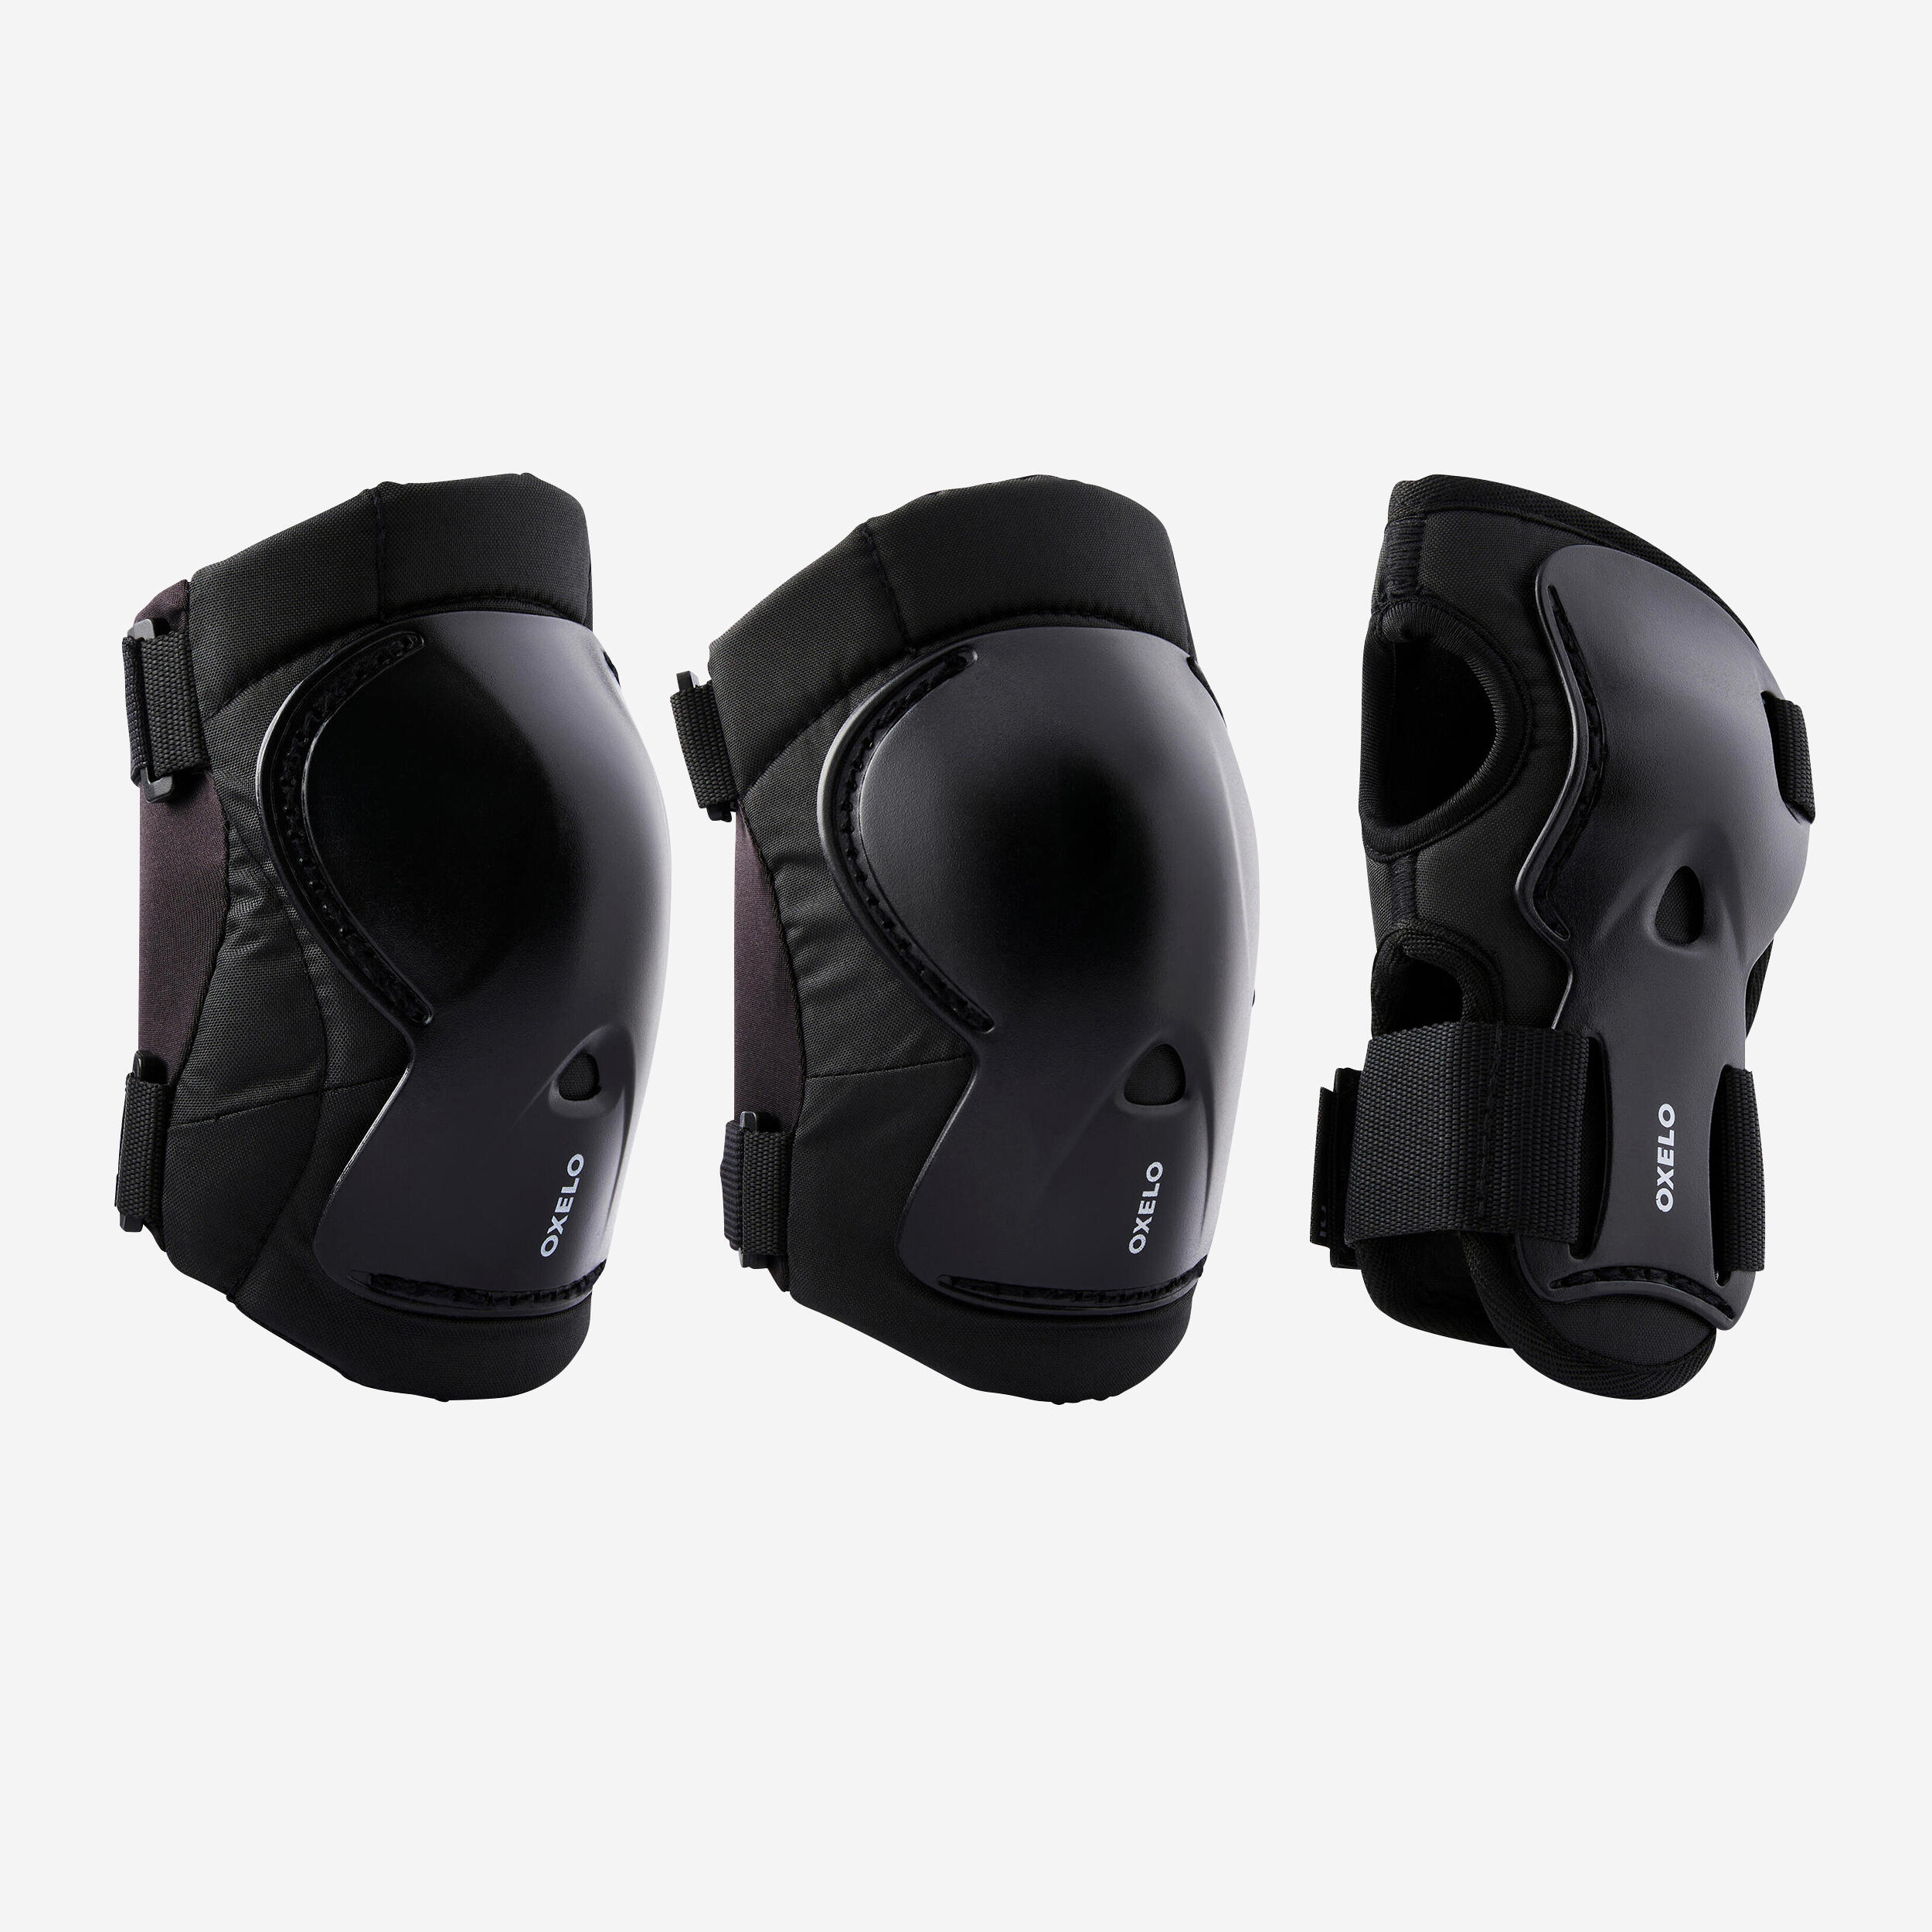 Buy Roller Sports Protections Pads Online In India, Oxelo